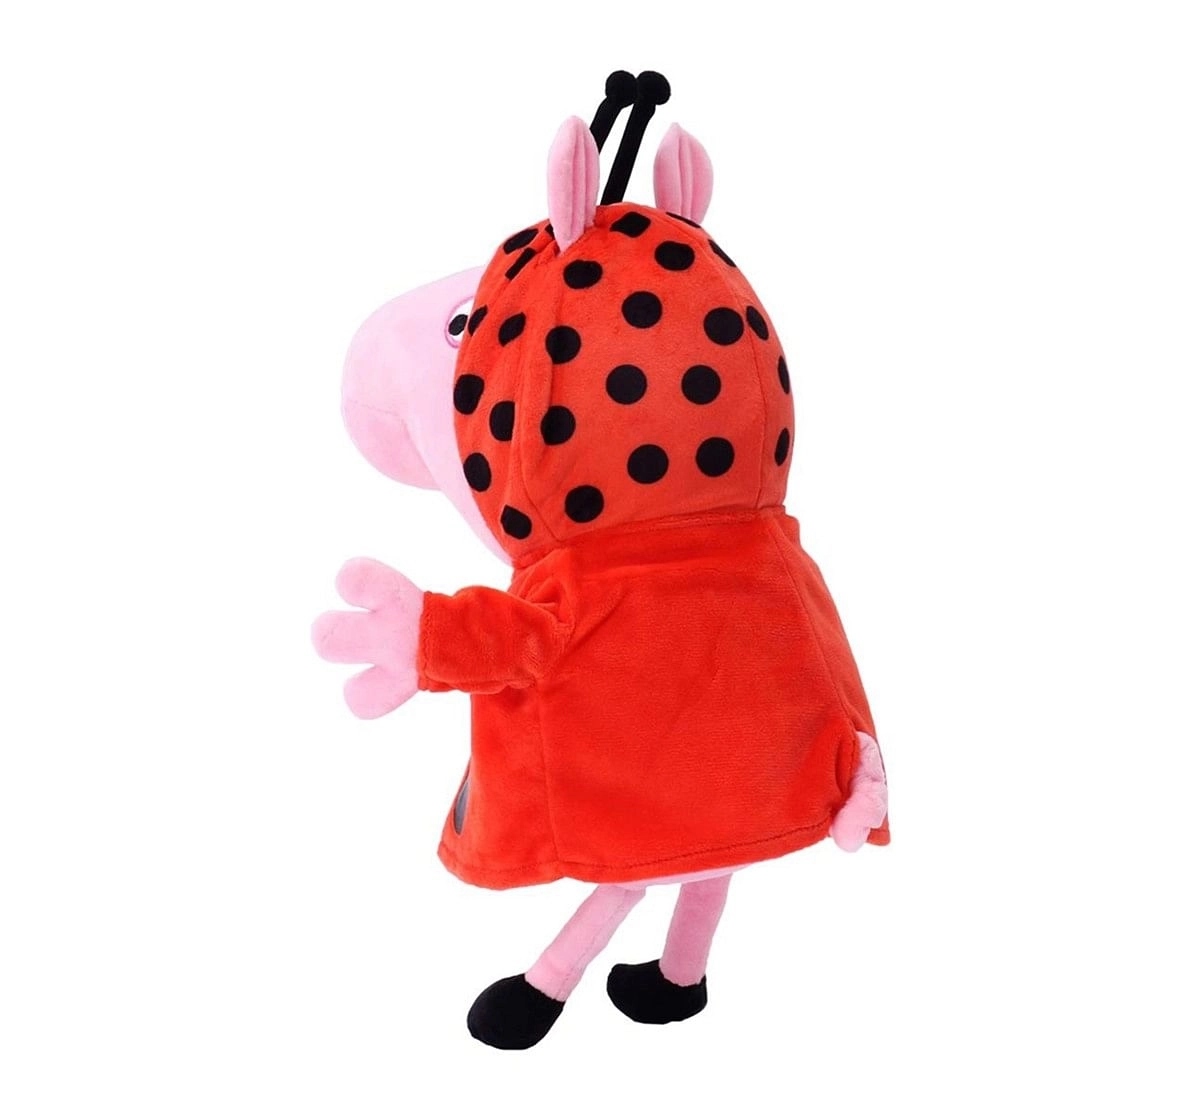 Peppa Pig In Ladybird Costume Soft Toy for age 1Y+ - 30 Cm 